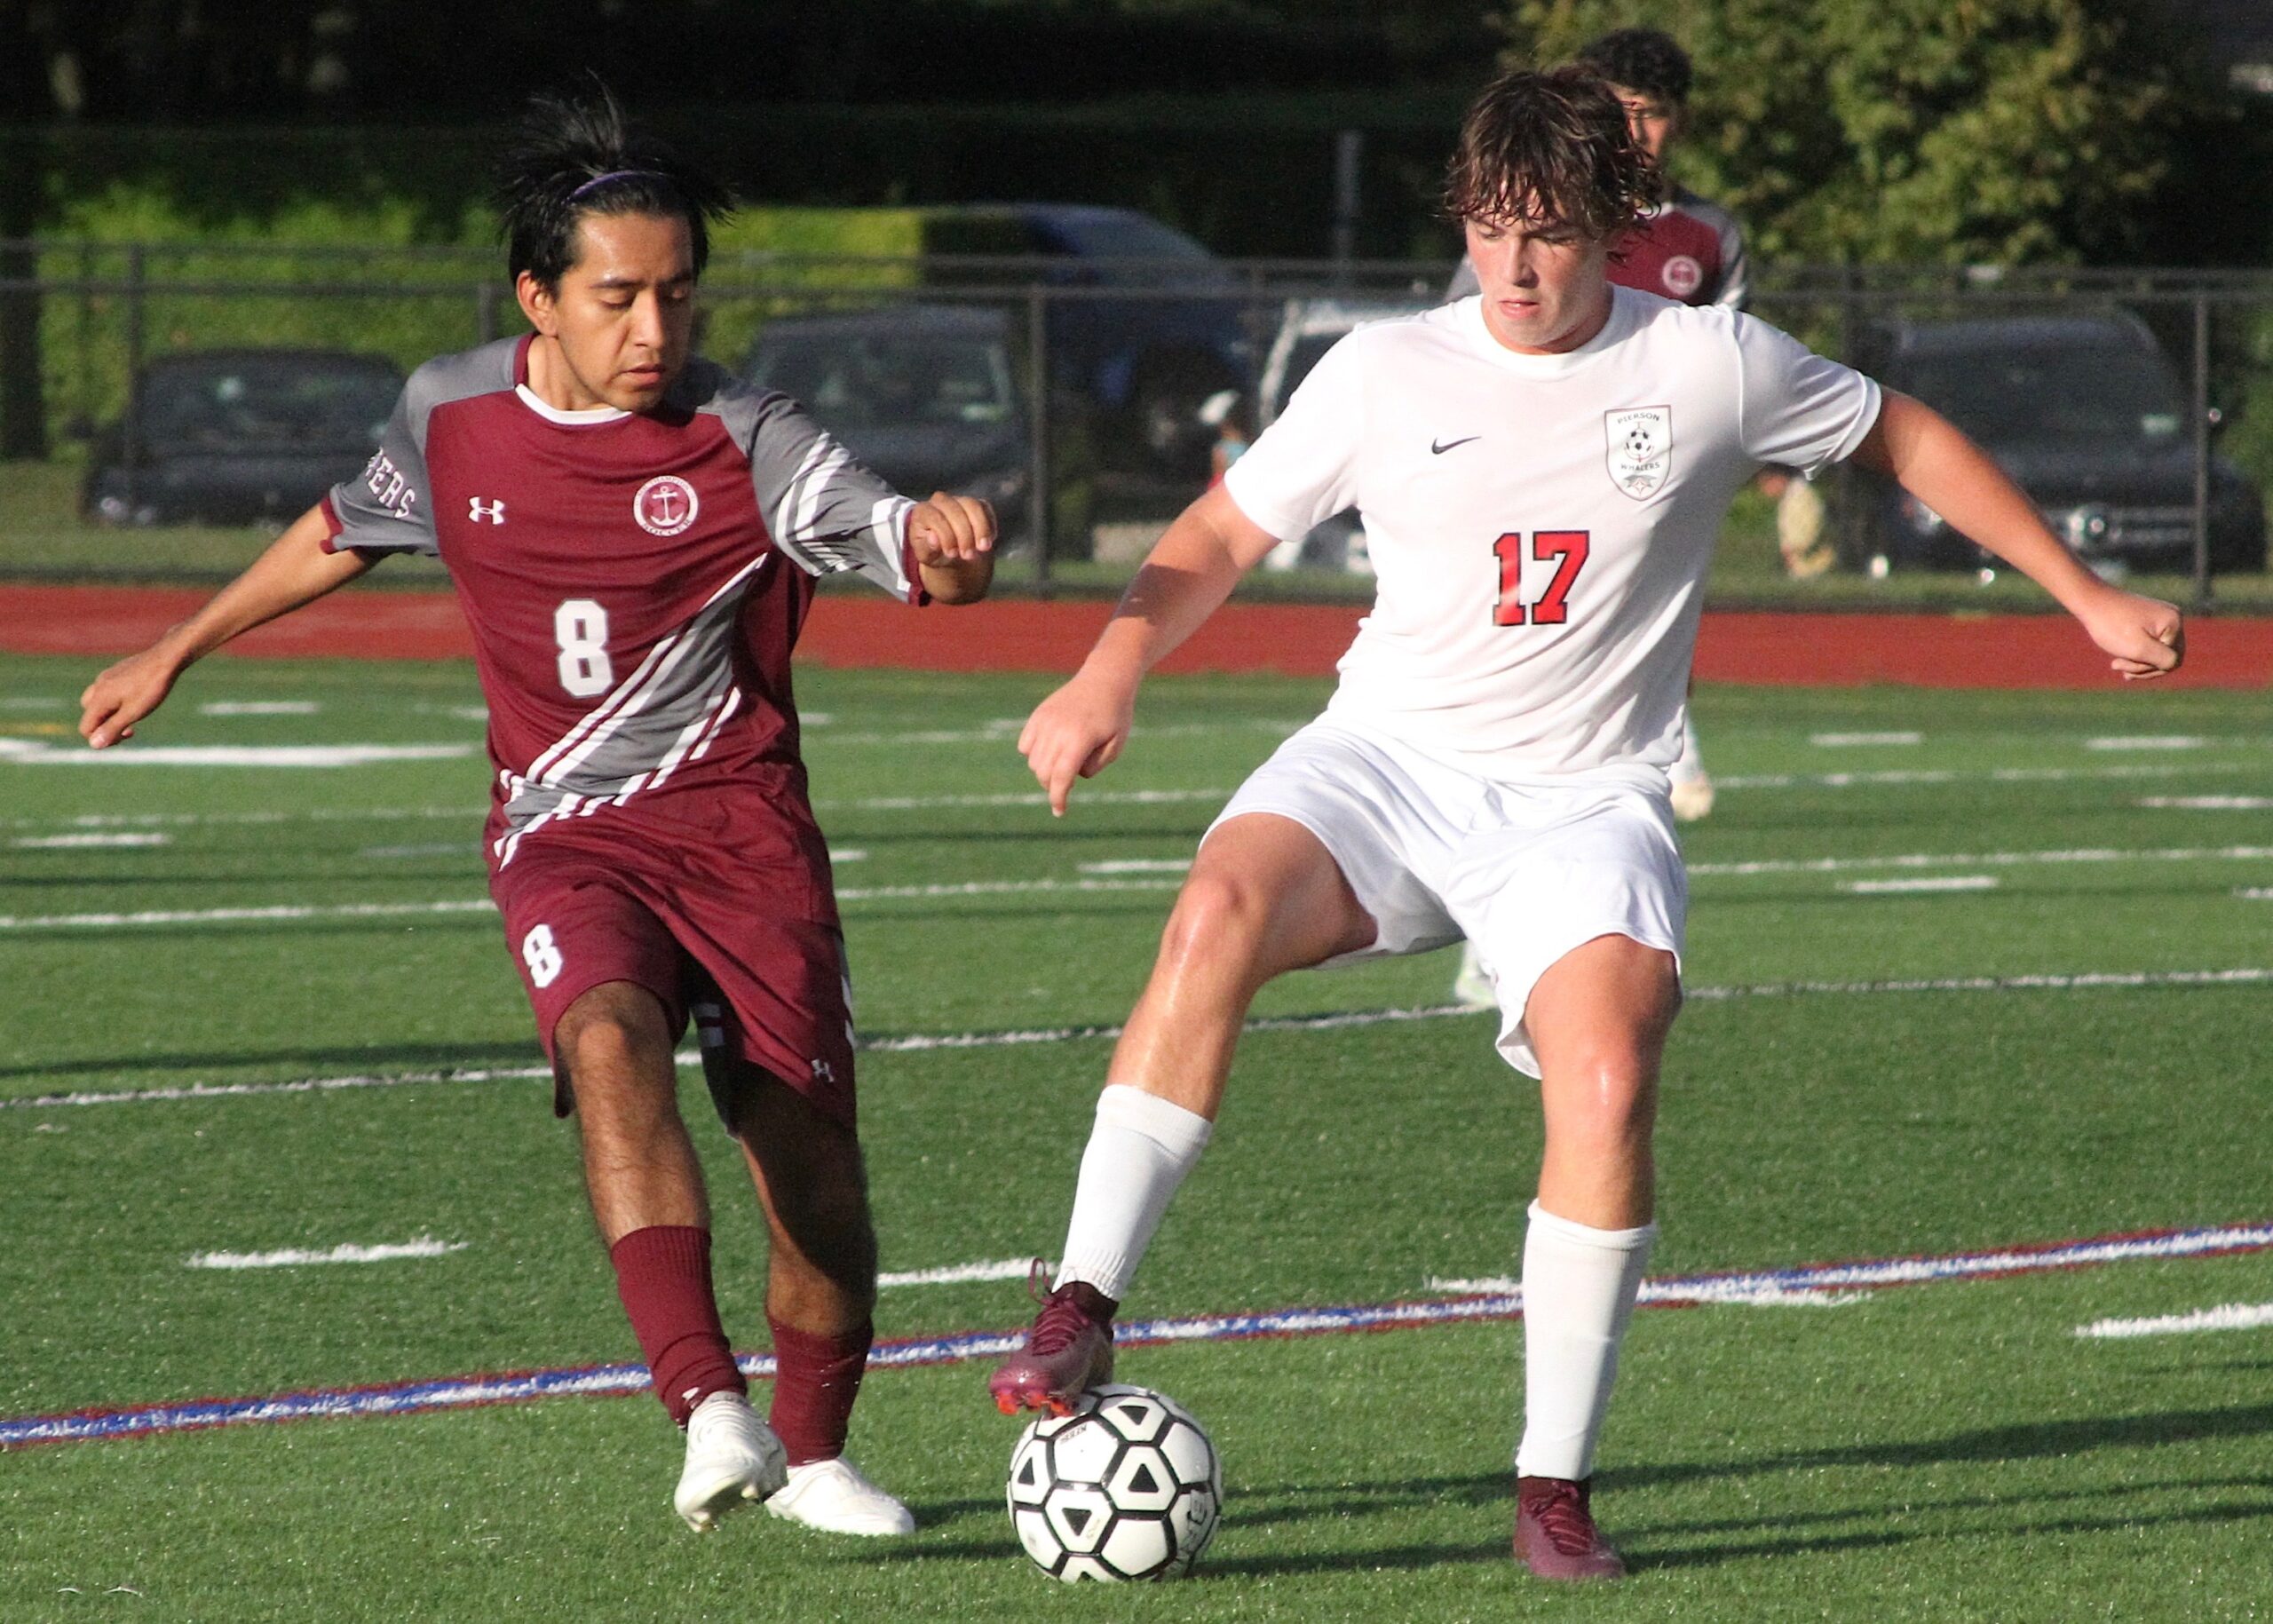 Southampton's Erick Campohermoso attempt to steal the ball from Pierson's Quinn Tanner. DESIRÉE KEEGAN